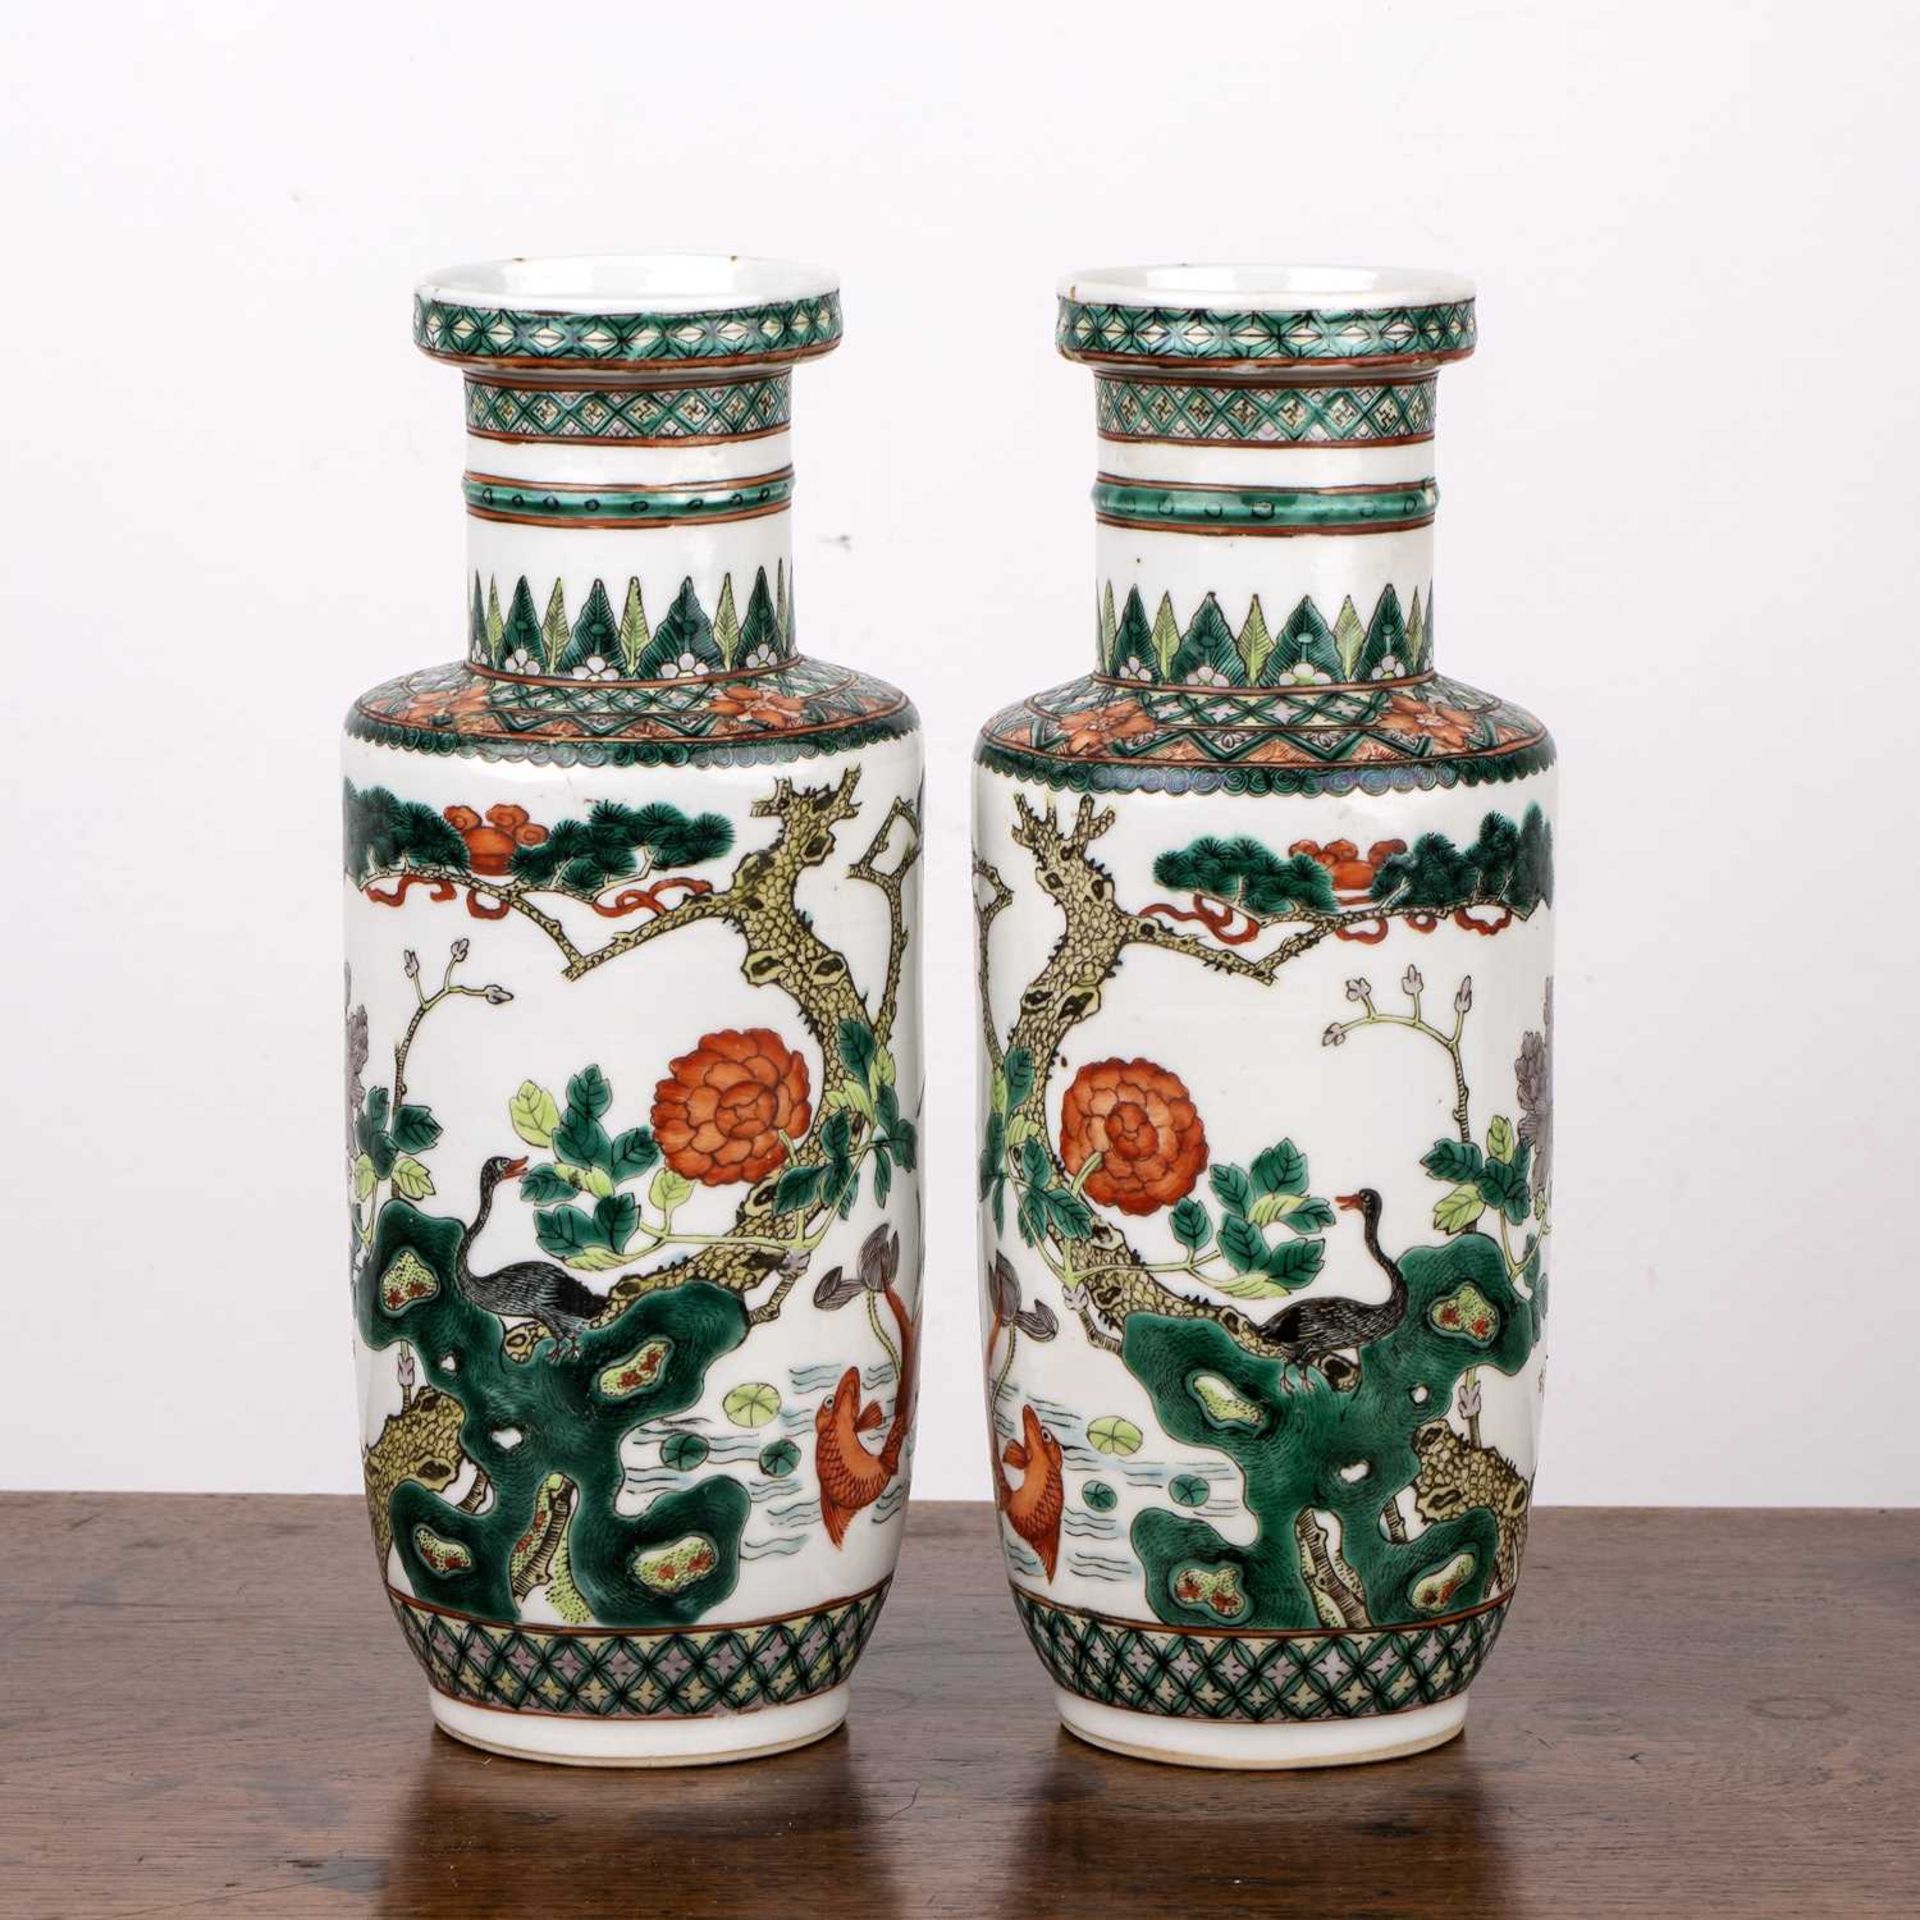 Pair of small famille verte rouleau vases Chinese, late 19th Century each painted in enamels with